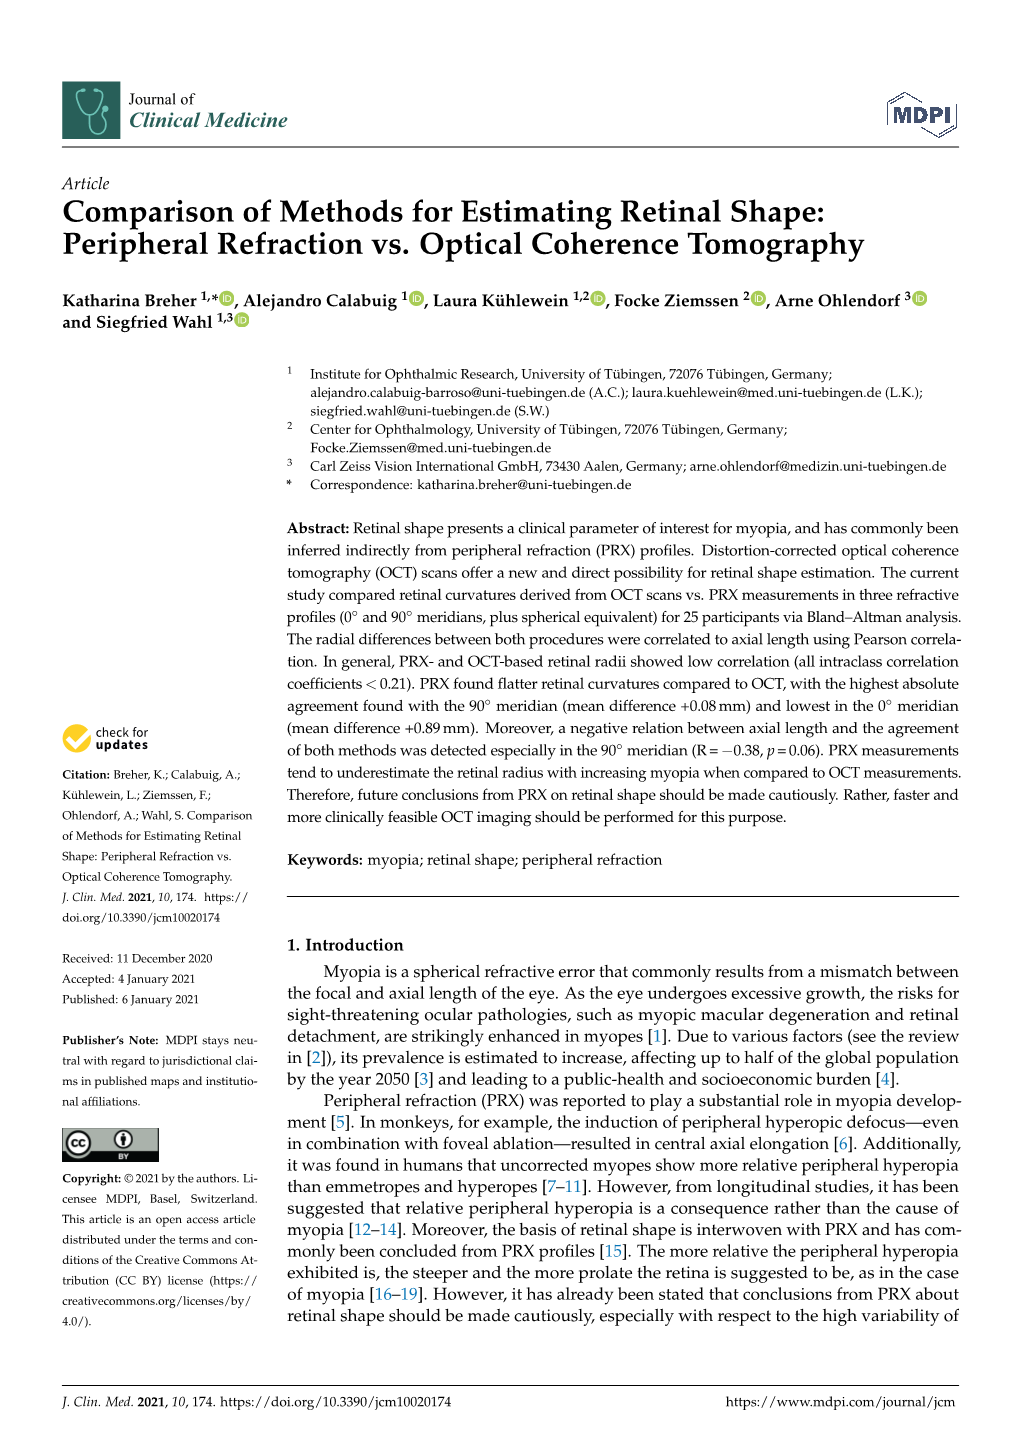 Peripheral Refraction Vs. Optical Coherence Tomography